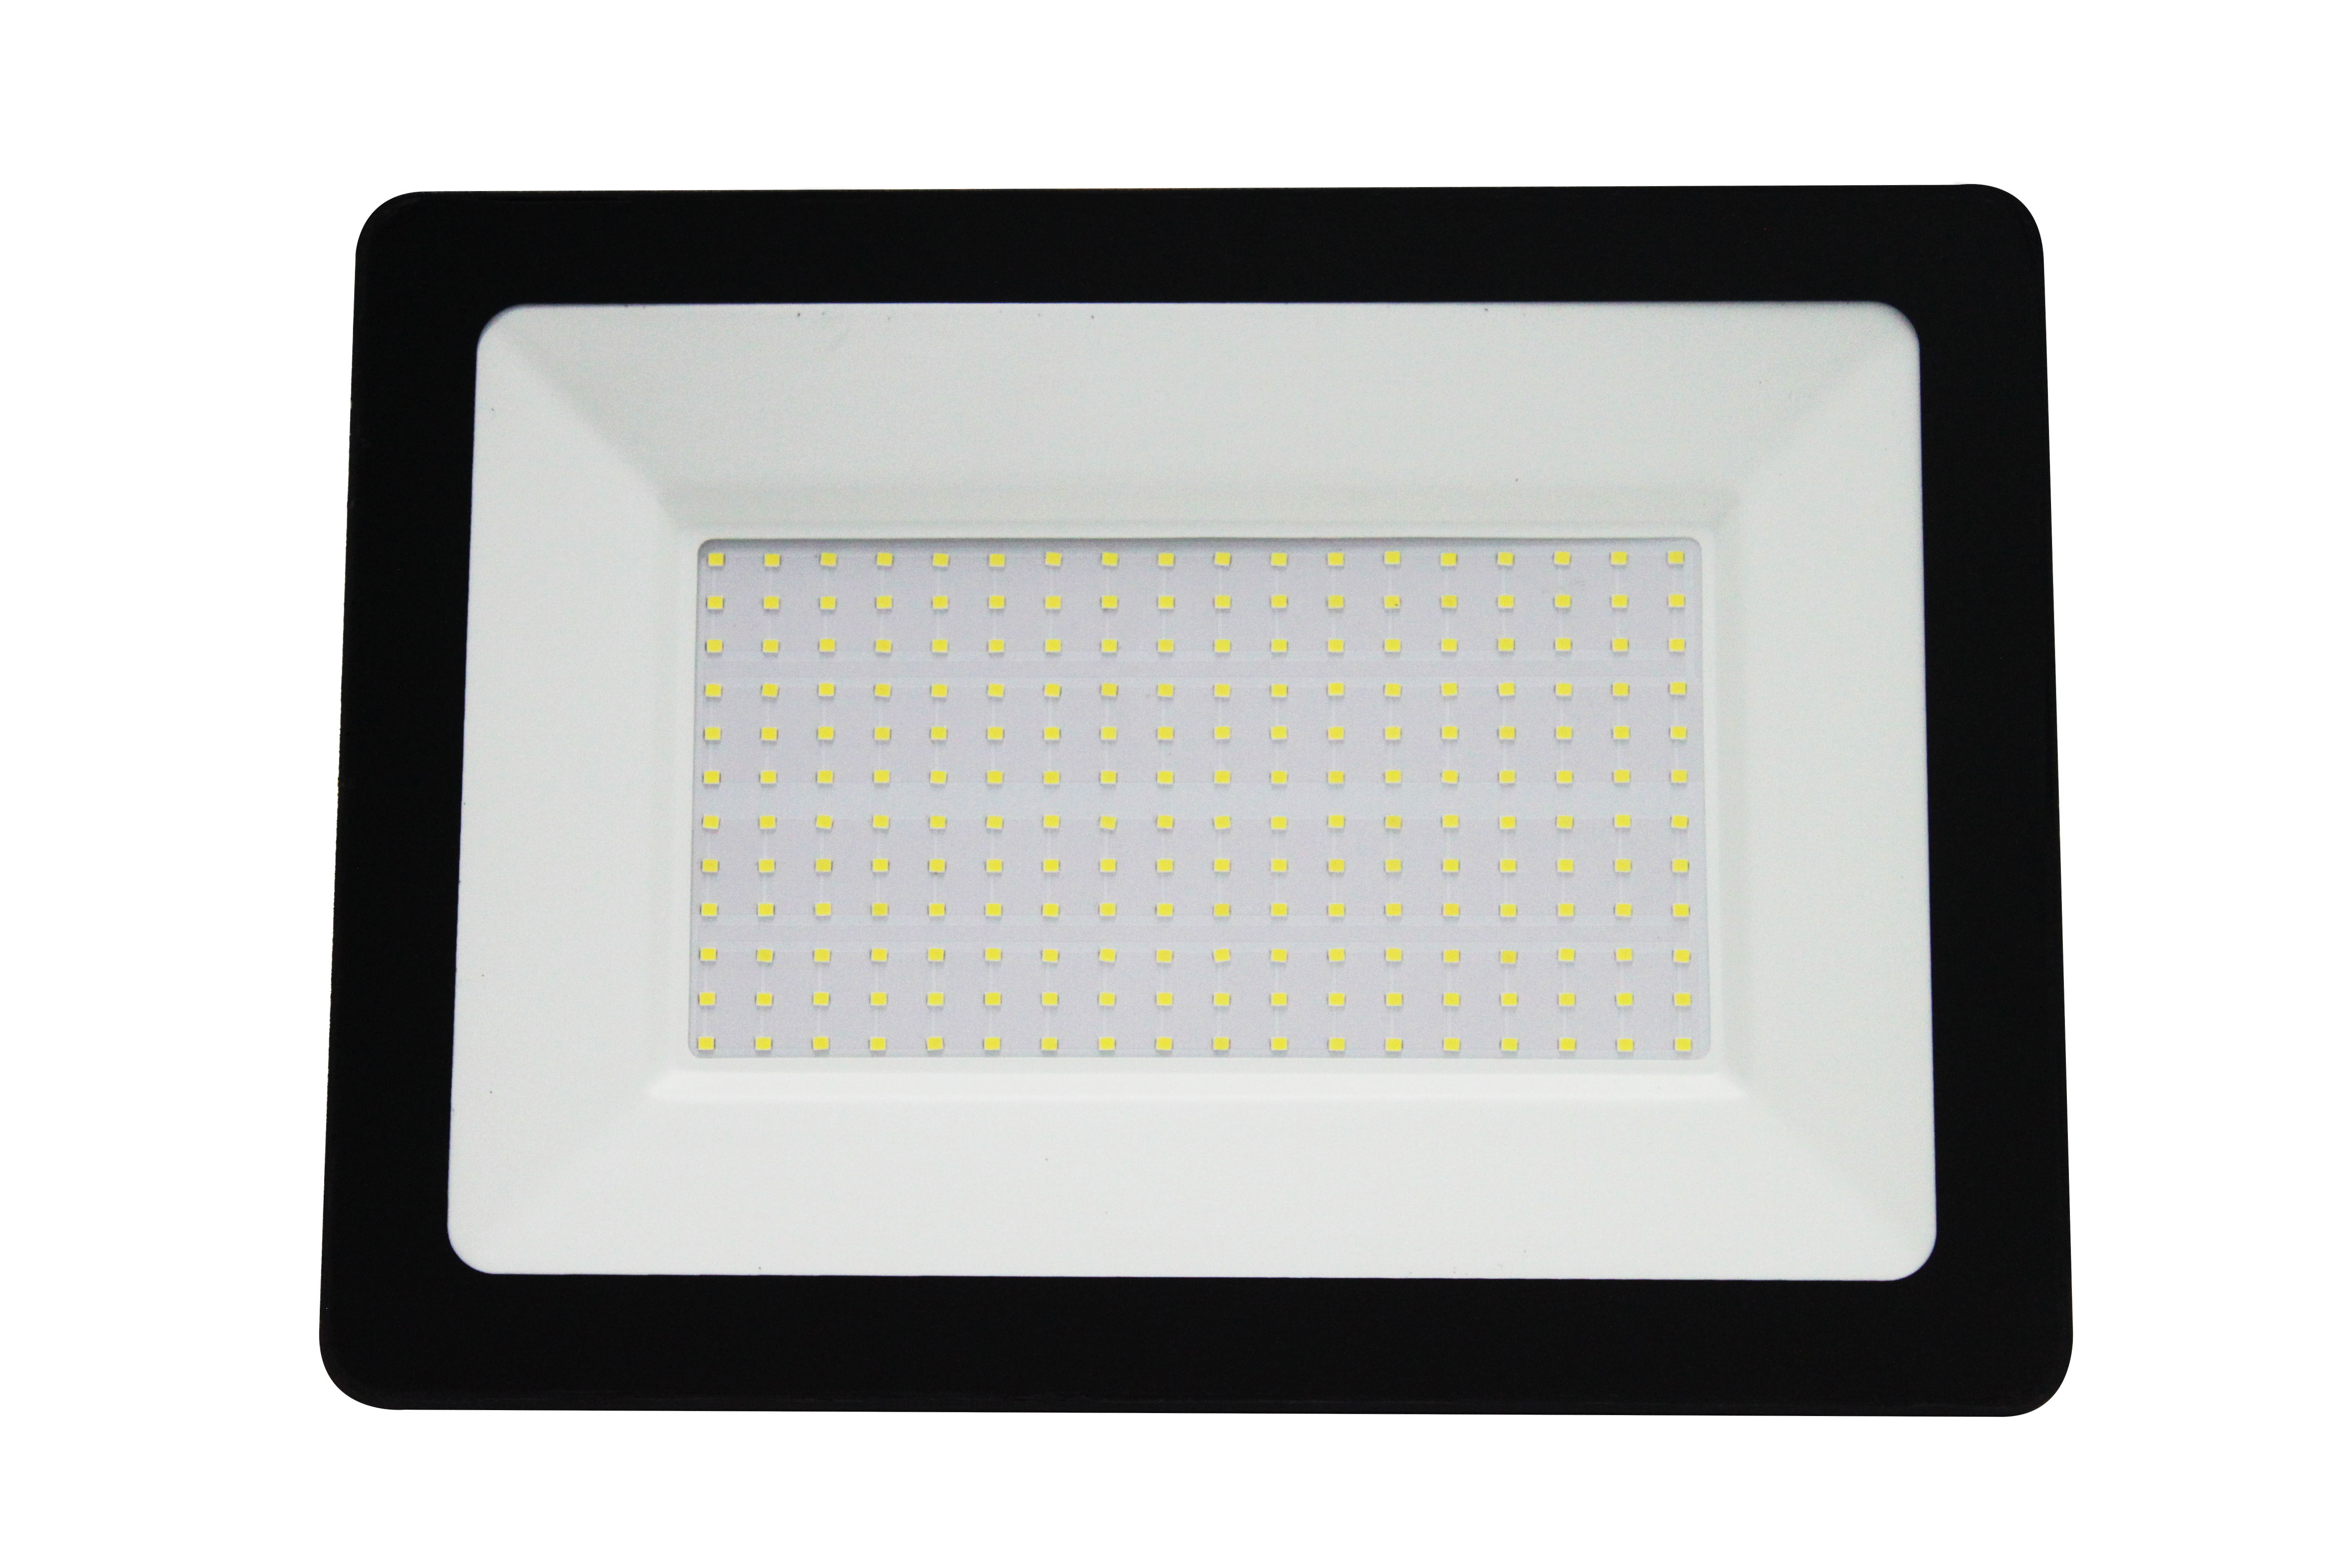 Flood Light 200 W SMD Without Driver